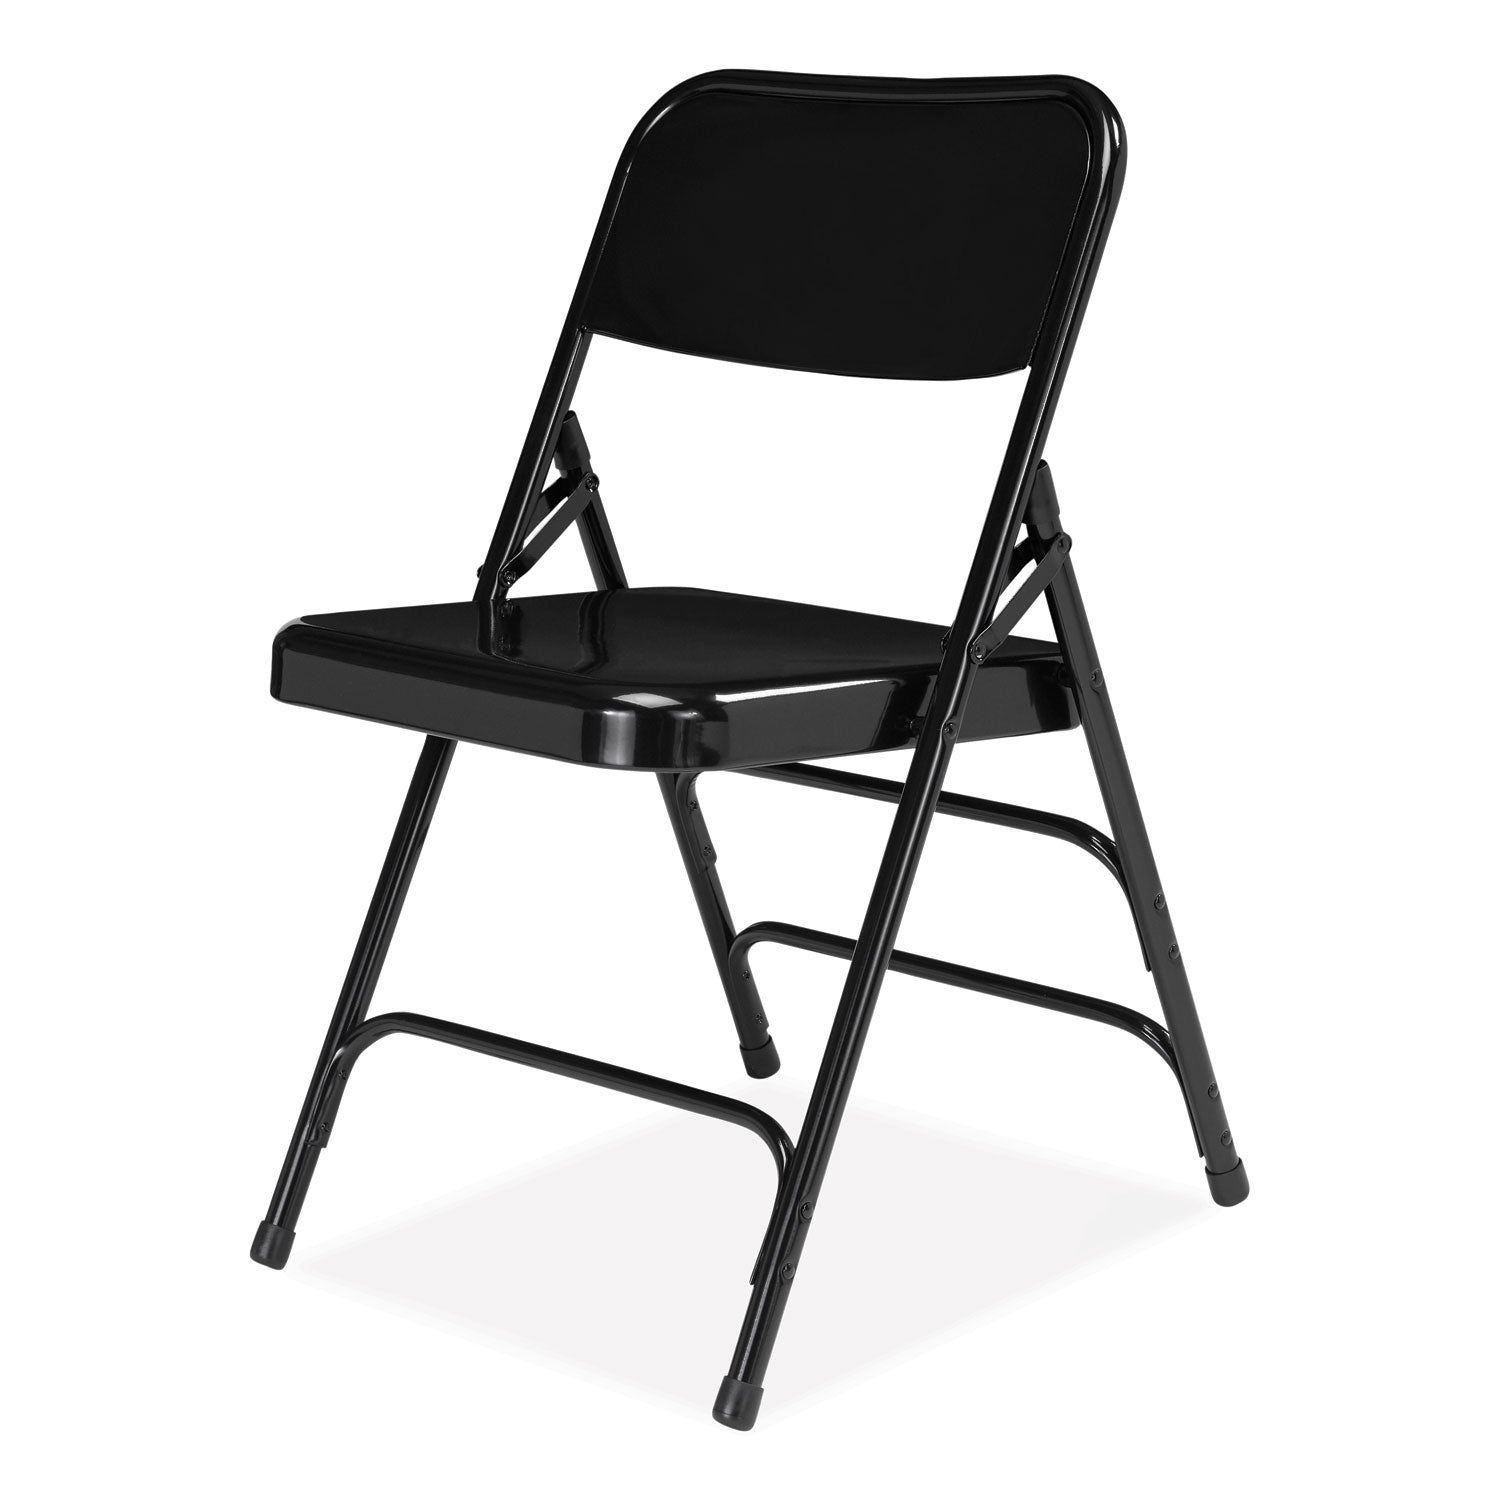 300-series-deluxe-all-steel-triple-brace-folding-chair-supports-480-lb-1725-seat-ht-black-4-ct-ships-in-1-3-bus-days_nps310 - 3